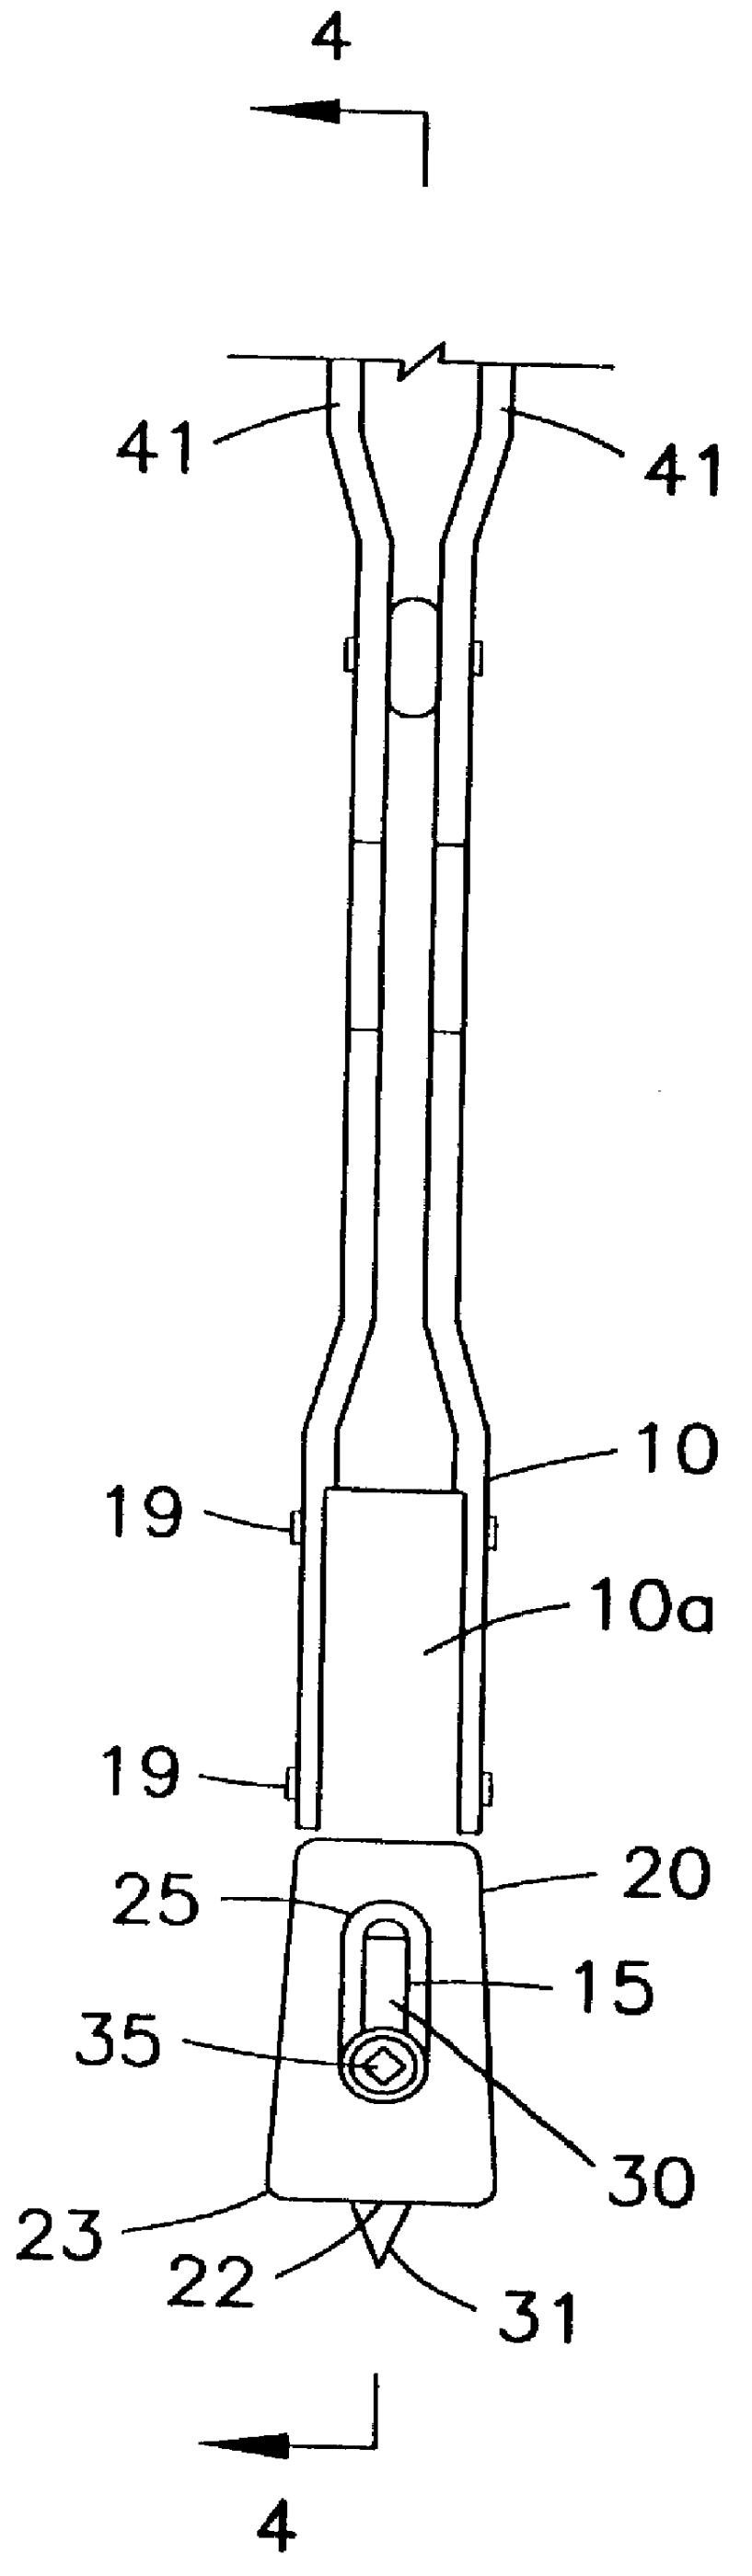 Tip structure for support leg of musical instrument stand